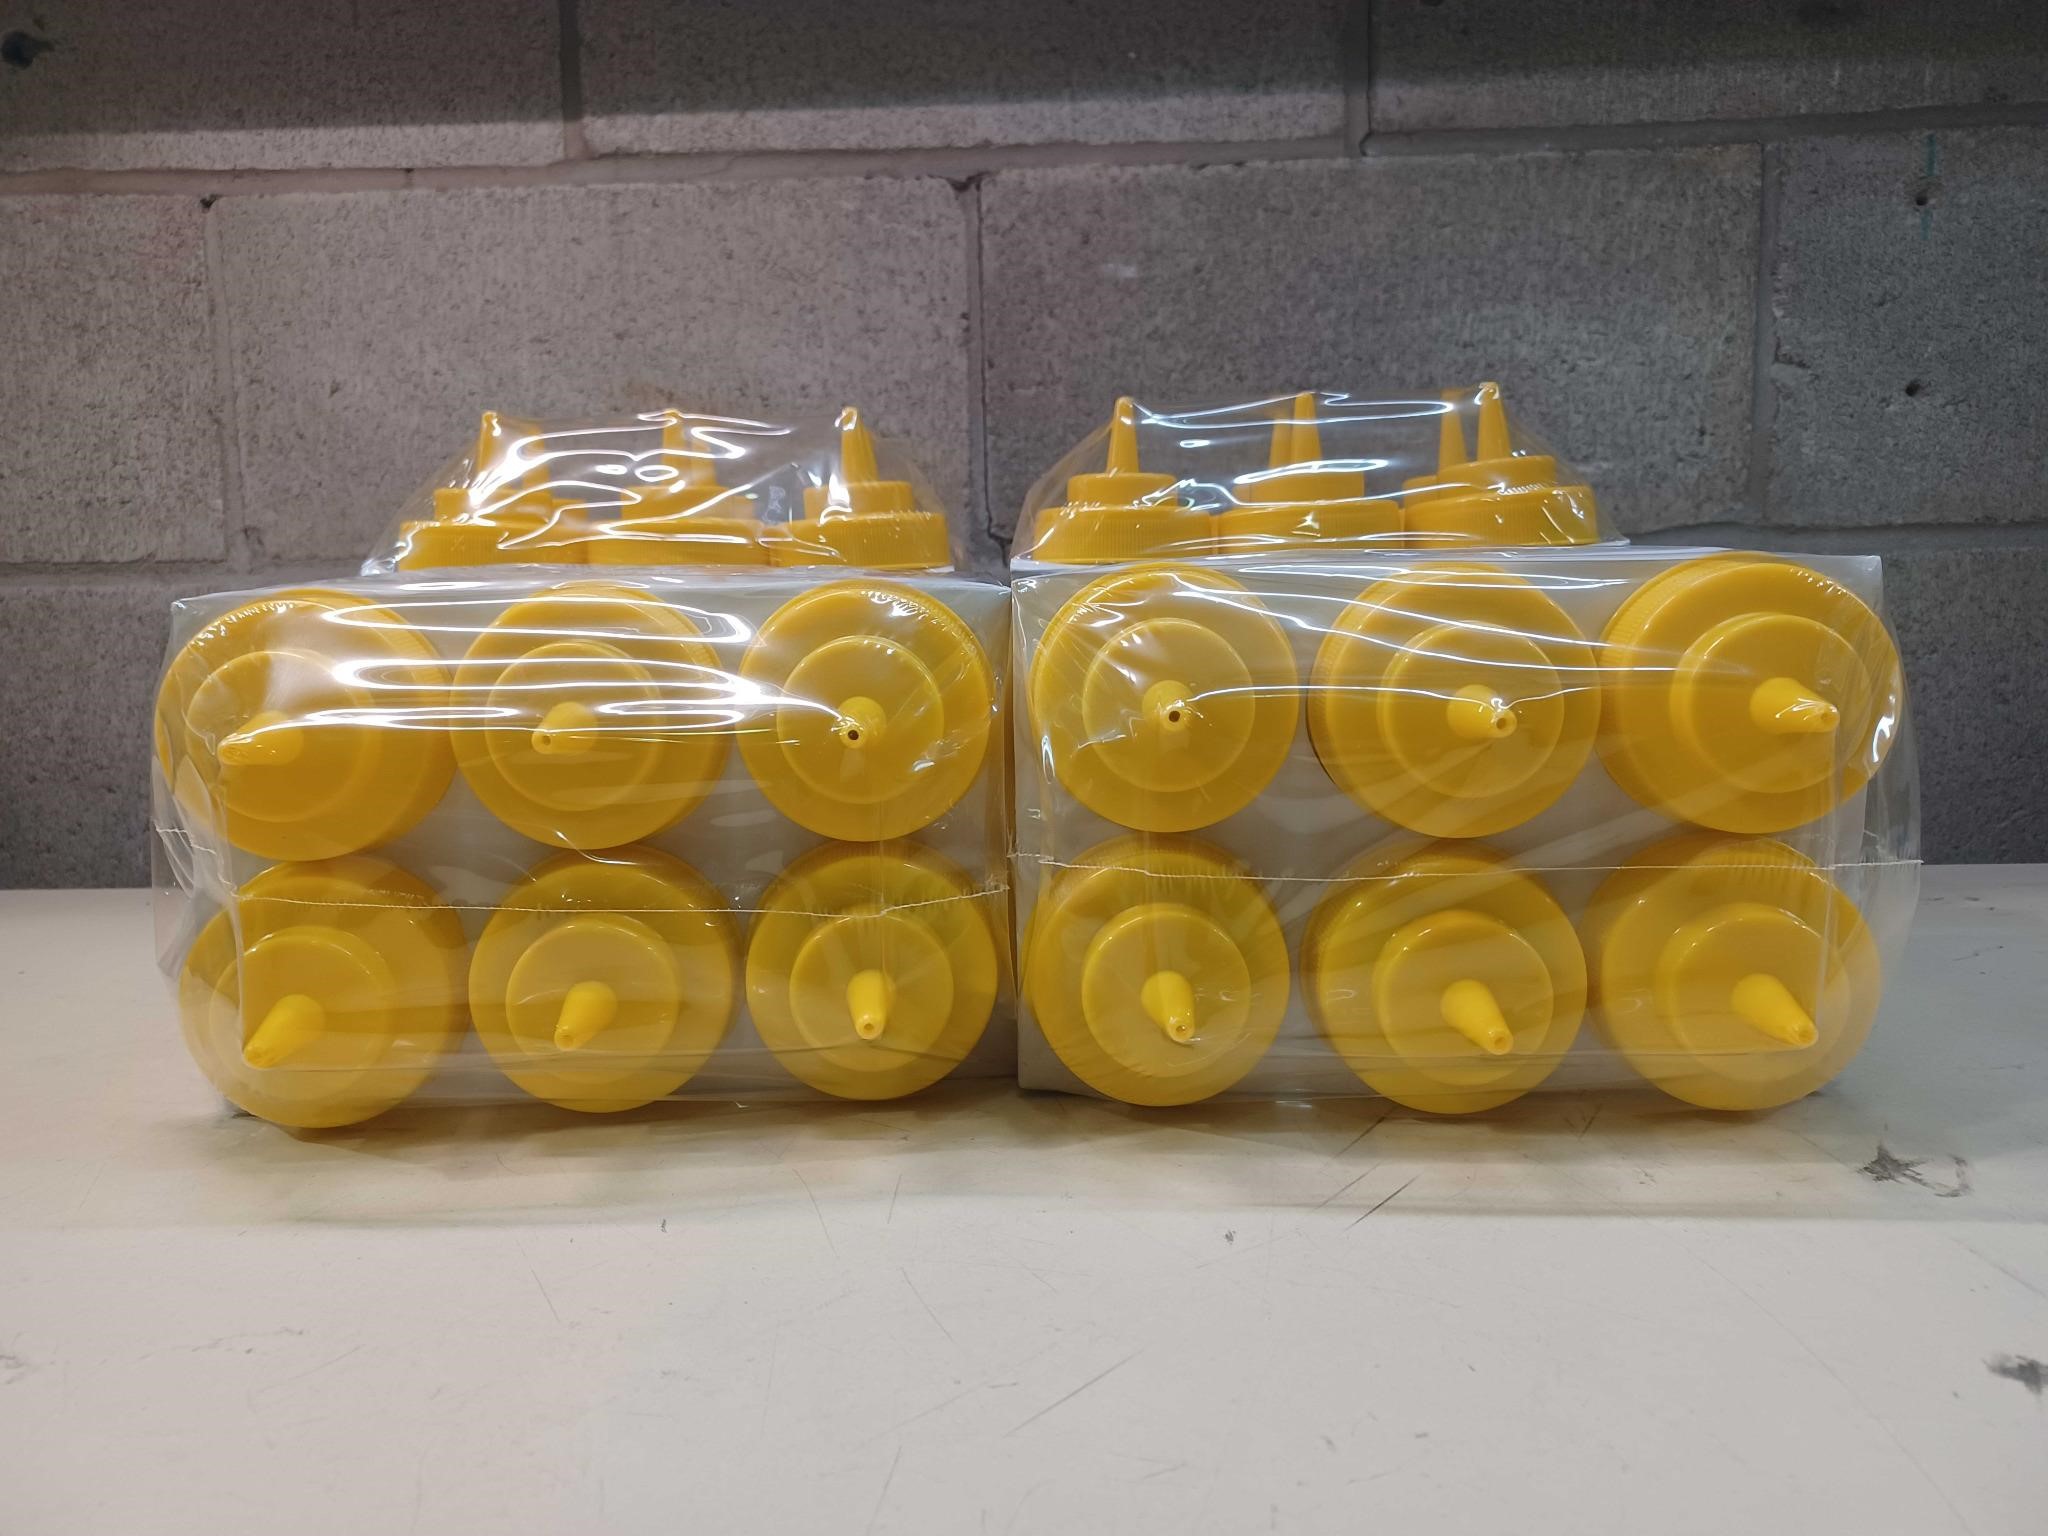 SEALED-Squeeze Bottles 6 Pack 16oz x4